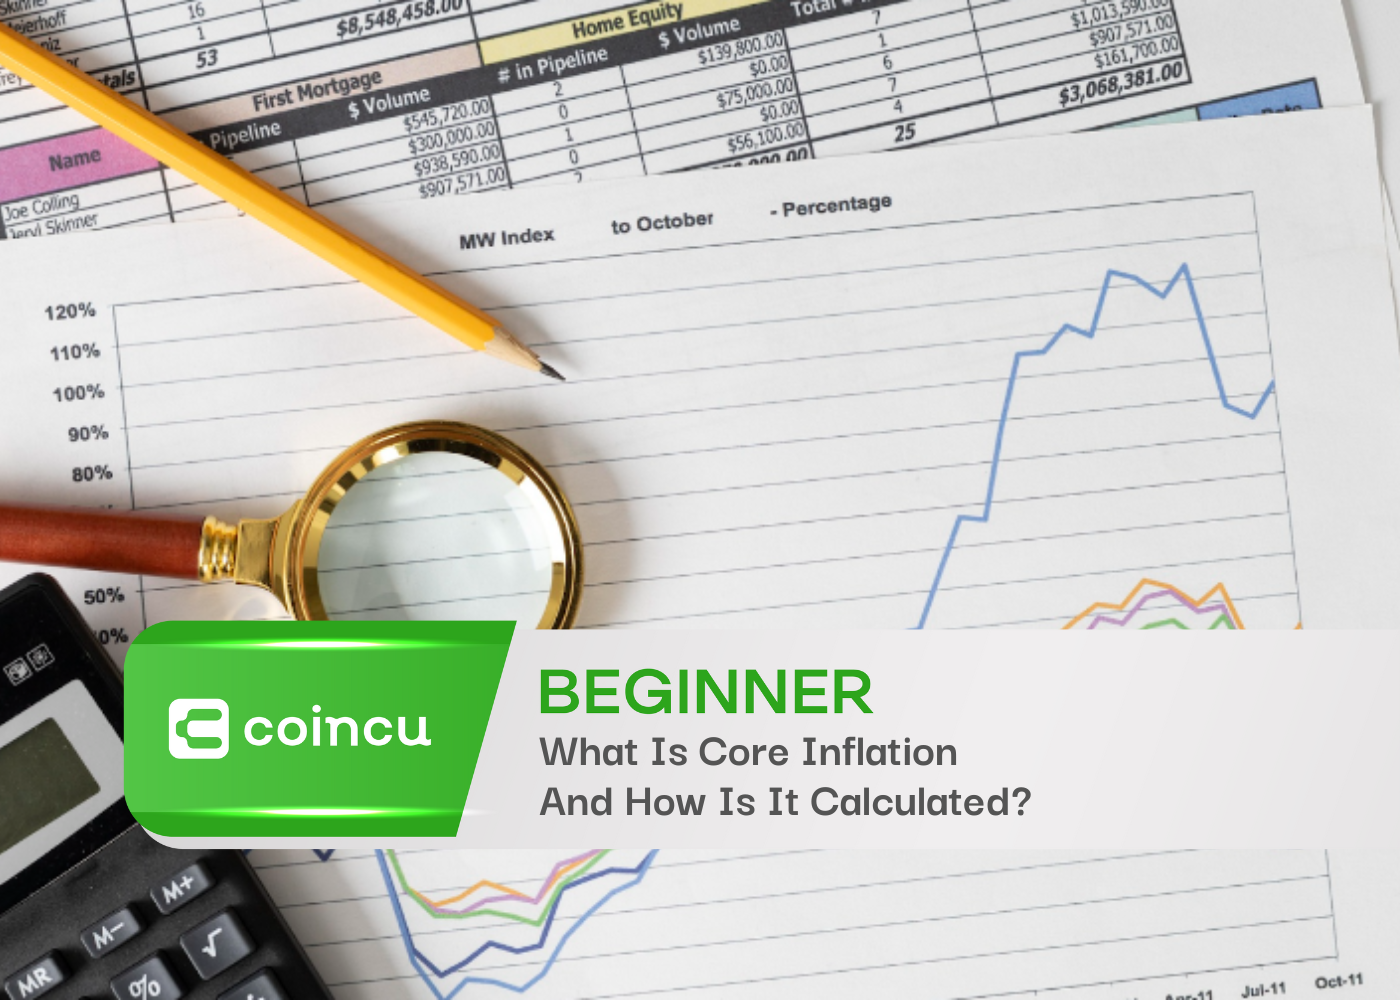 What Is Core Inflation And How Is It Calculated?